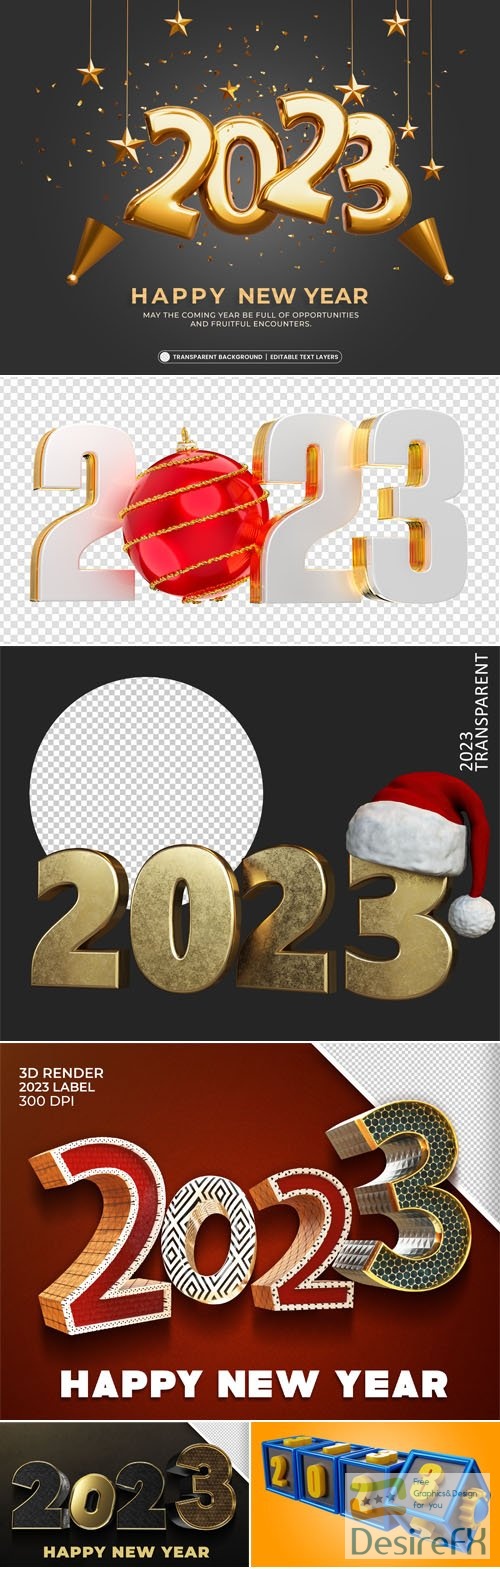 Happy New Year 2023 - 20+ 3D Renders PSD Templates